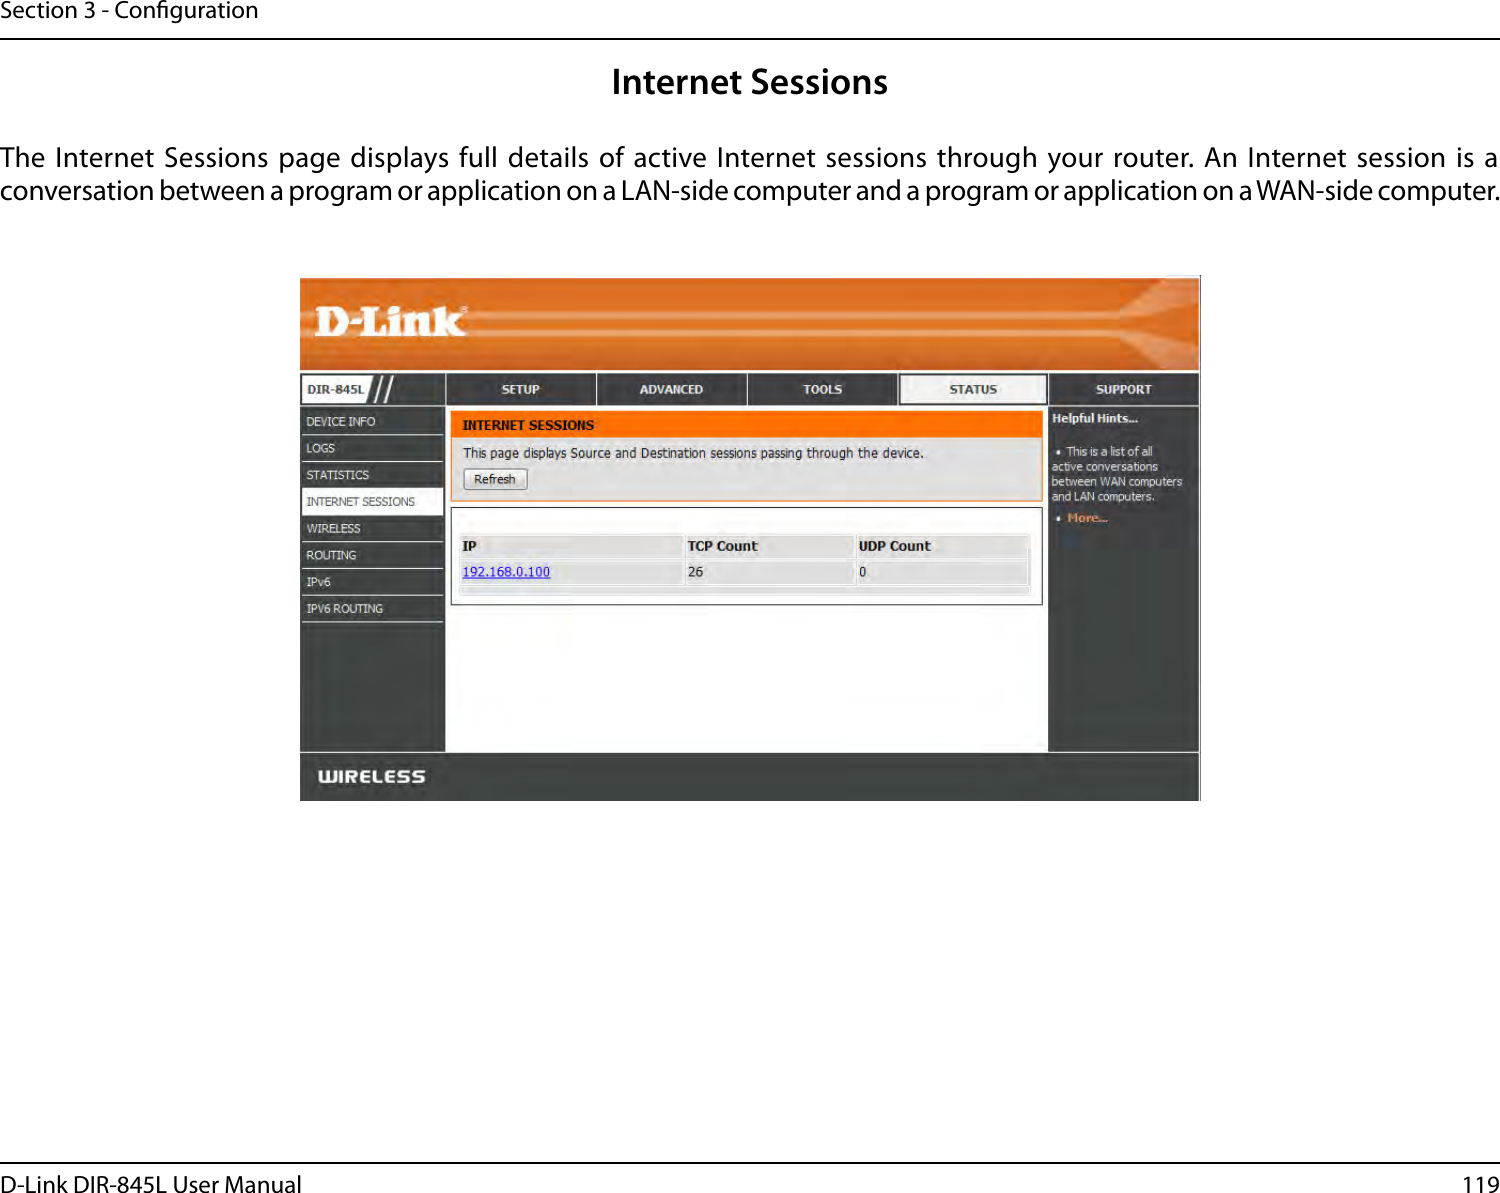 119D-Link DIR-845L User ManualSection 3 - CongurationInternet SessionsThe Internet Sessions page displays full  details of active Internet sessions  through your router. An  Internet session is  a conversation between a program or application on a LAN-side computer and a program or application on a WAN-side computer. 